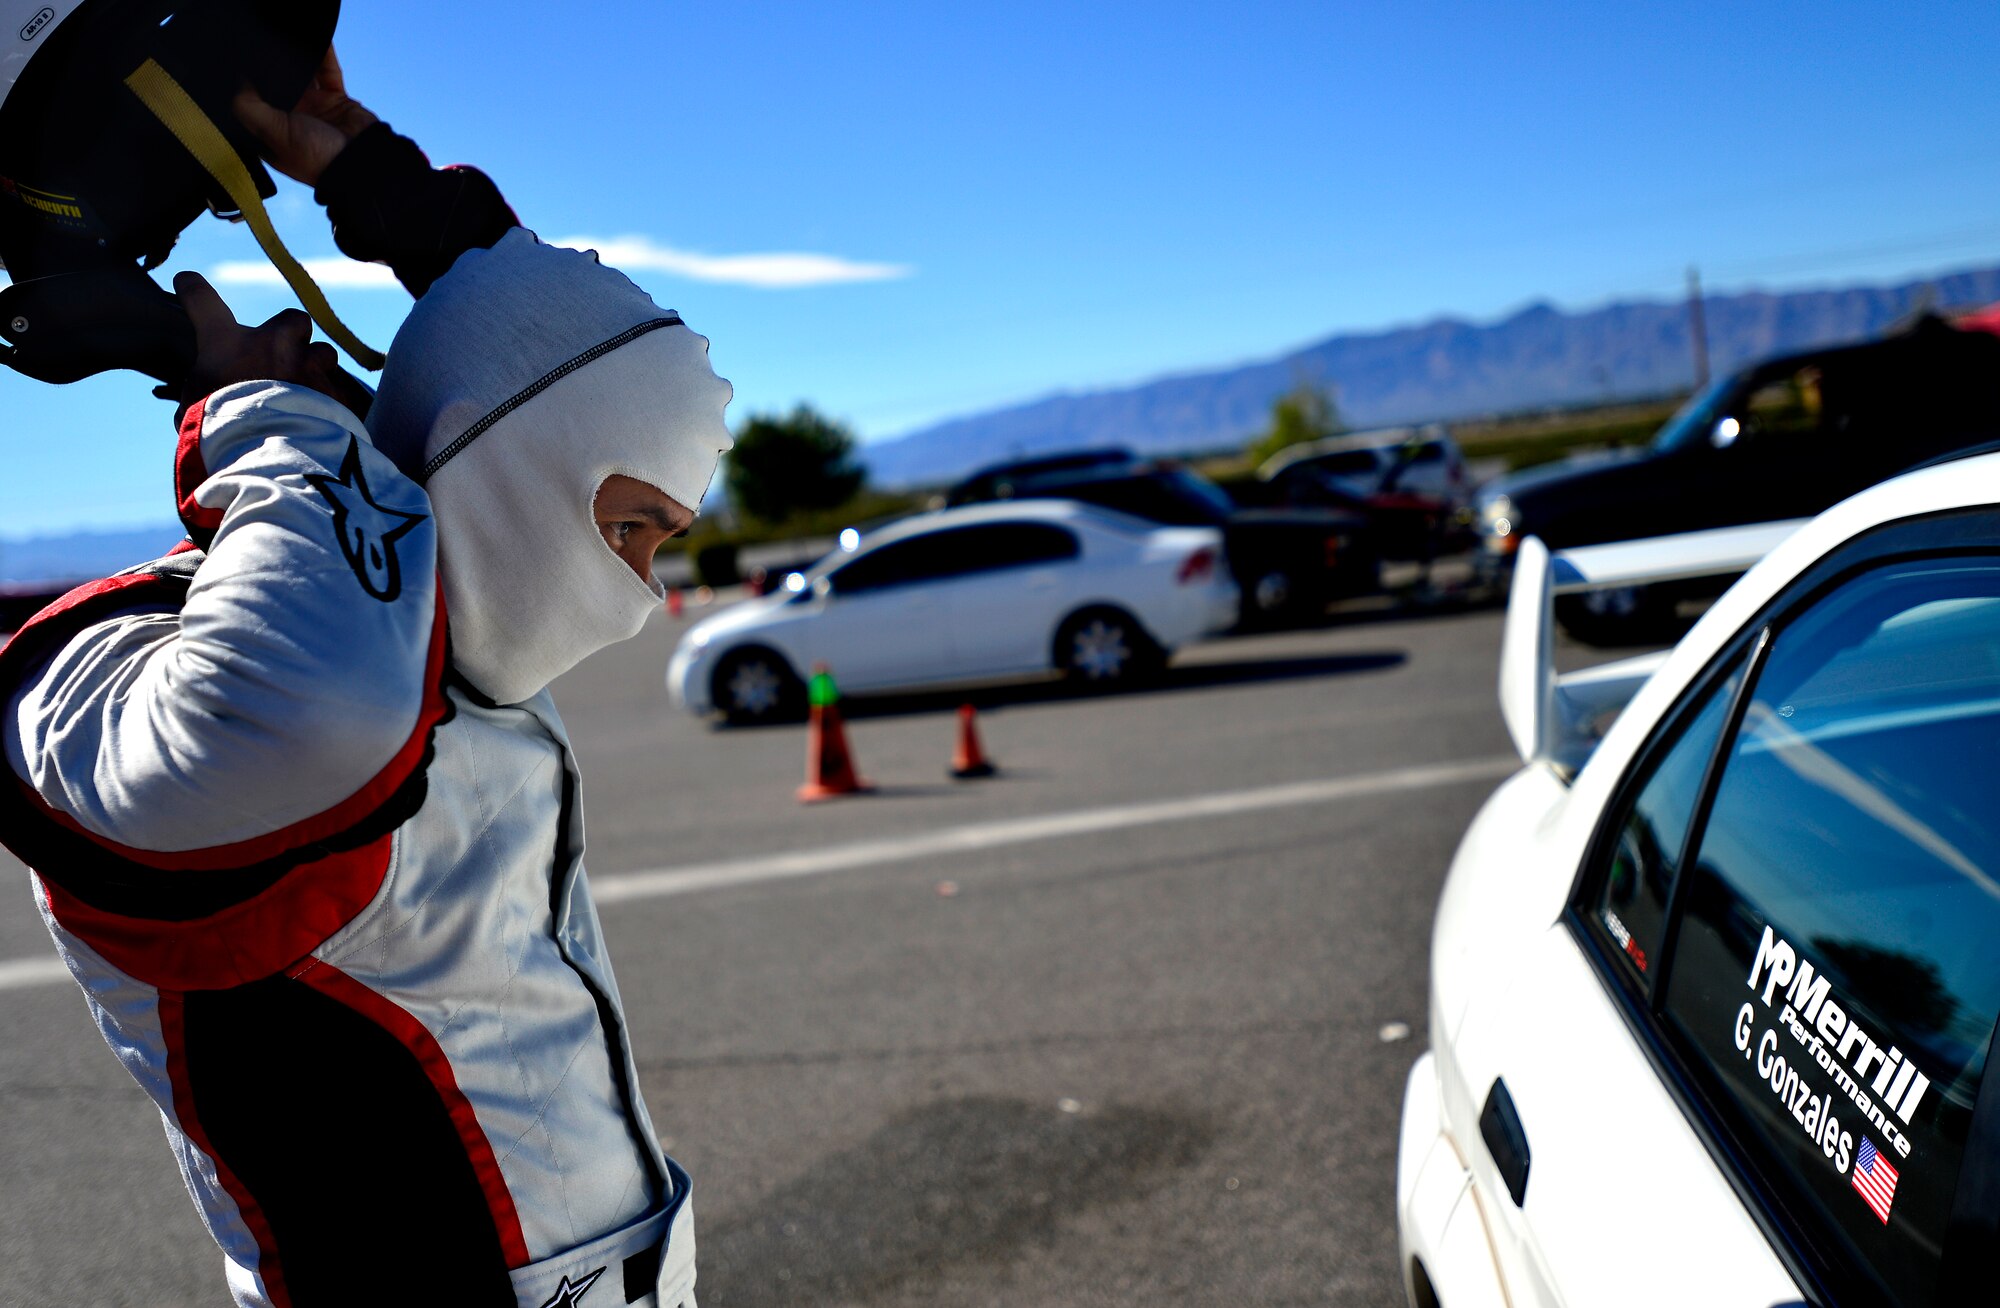 Tech. Sgt. Gabriel, 432nd Wing/432nd Air Expeditionary Wing MQ-9 Reaper sensor operator takes his helmet off after racing at the Spring Mountain Raceway Nov. 1, 2015, in Pahrump, Nevada. Gabriel participated in the race as part of the Redline Time Attack series which puts races in different class against the clock to see who can get the fastest time. Gabriel placed second in second highest class. (U.S. Air Force photo by Airman 1st Class Christian Clausen/Released)